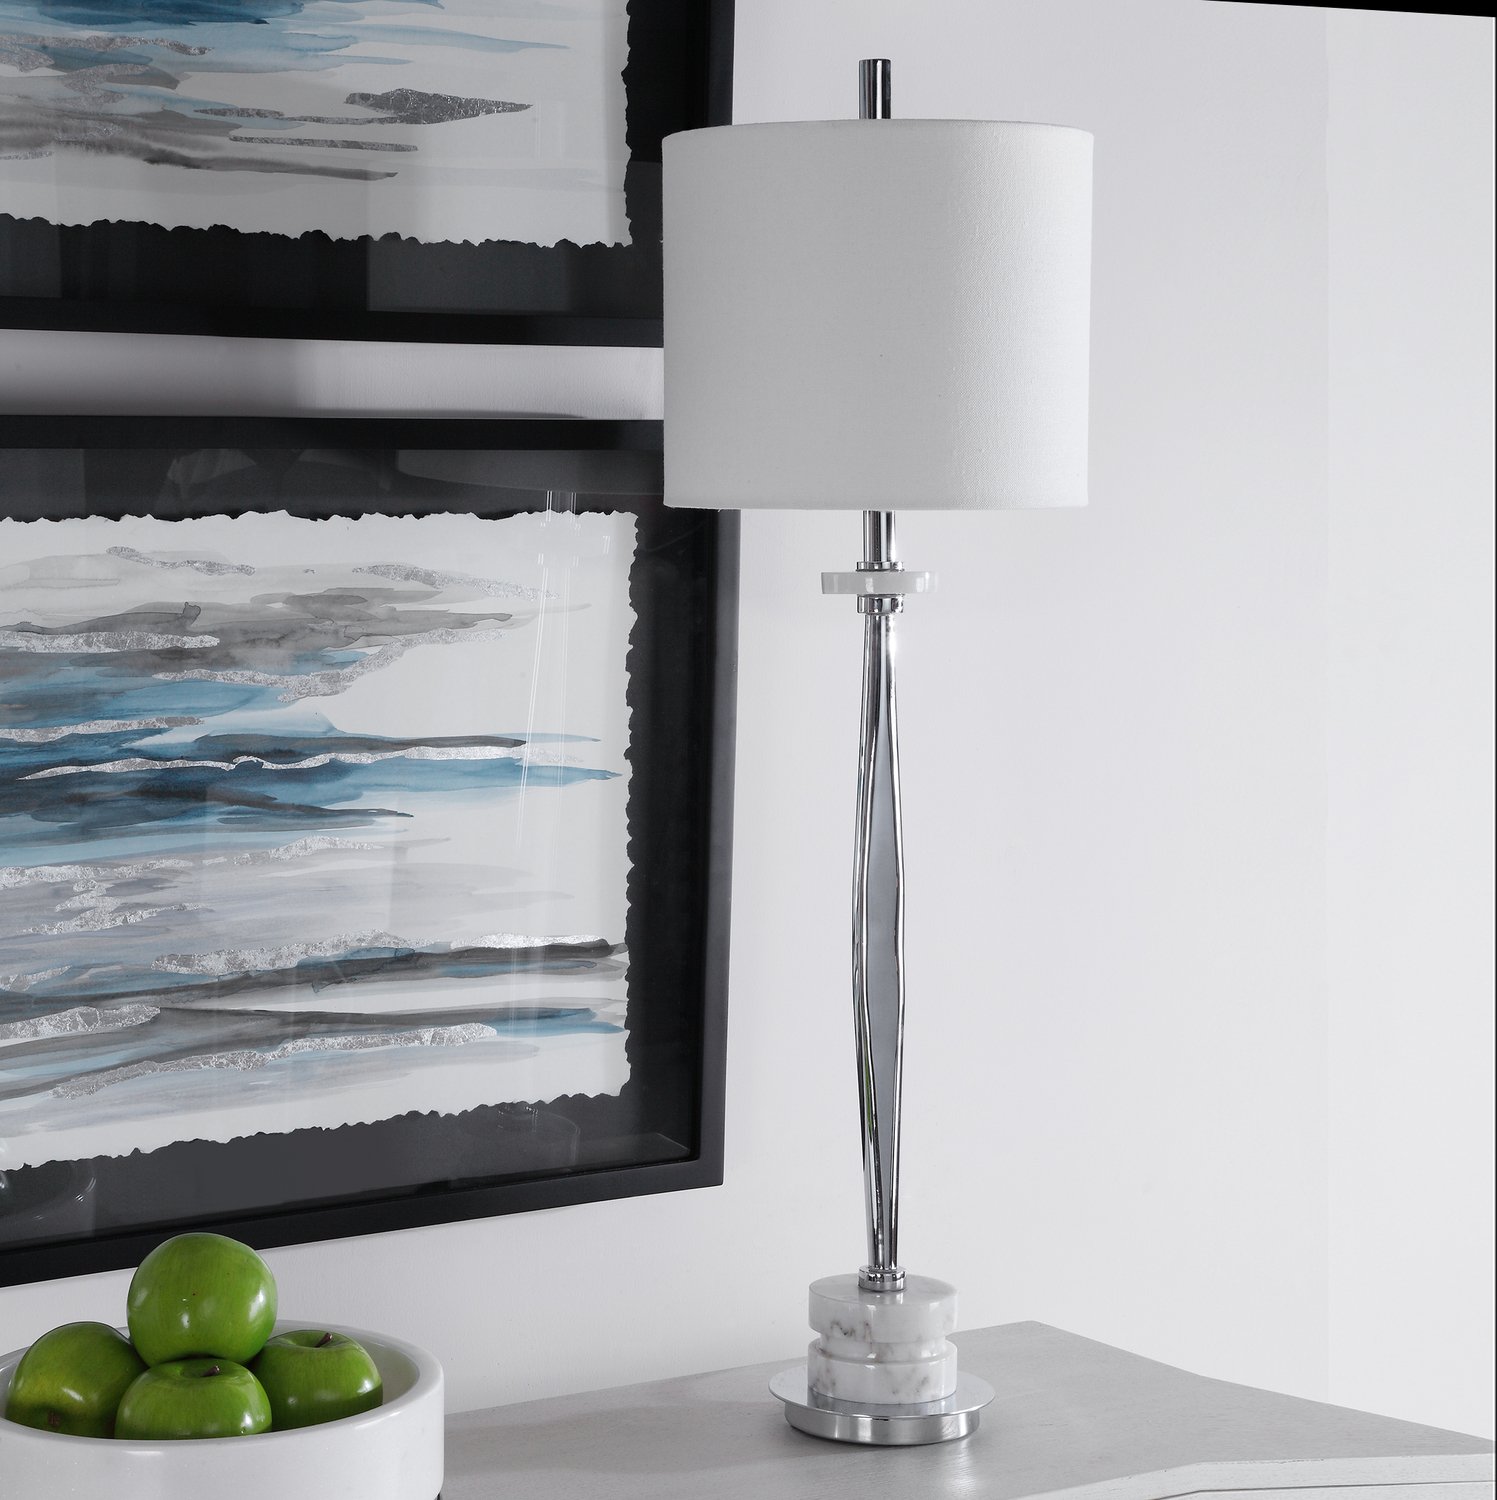 Uttermost Chrome Buffet Lamp Table Lamps This Buffet Lamp Features A Clean, Modern Look With A Chrome Plated Iron Base Paired With Polished White Marble Details With Light Gray Veining.